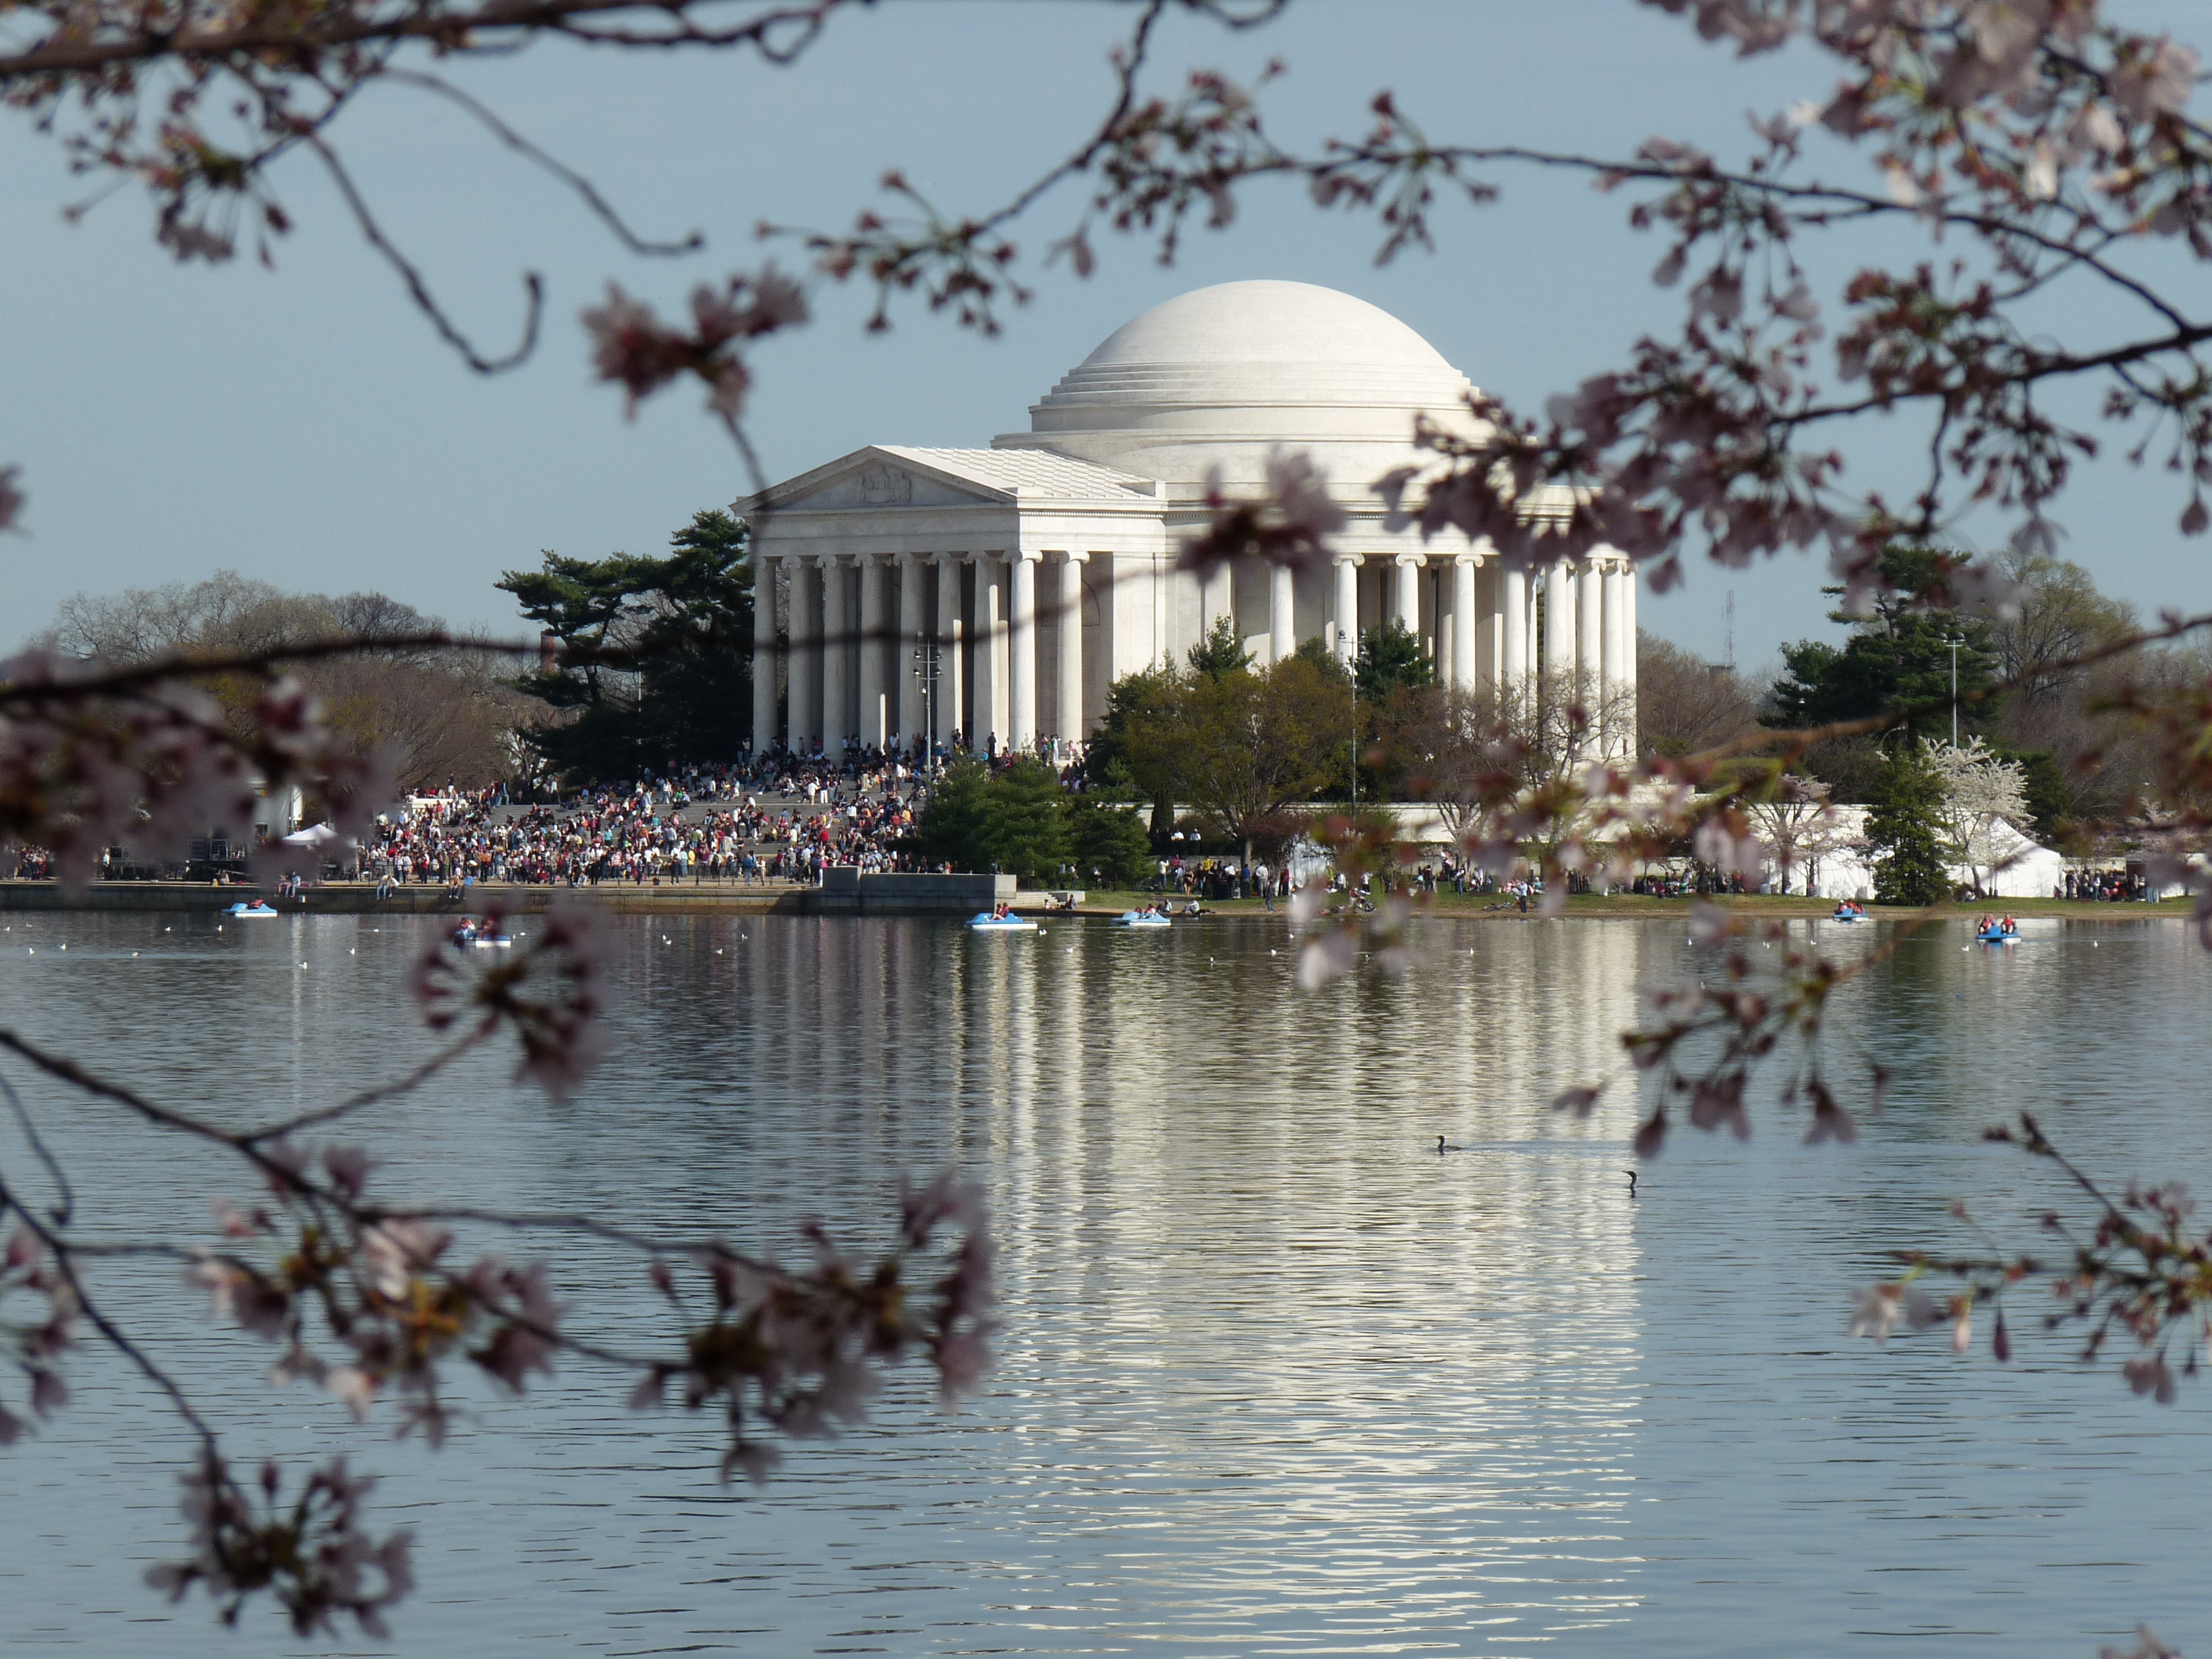 The Jefferson Memorial among Cherry Blossoms